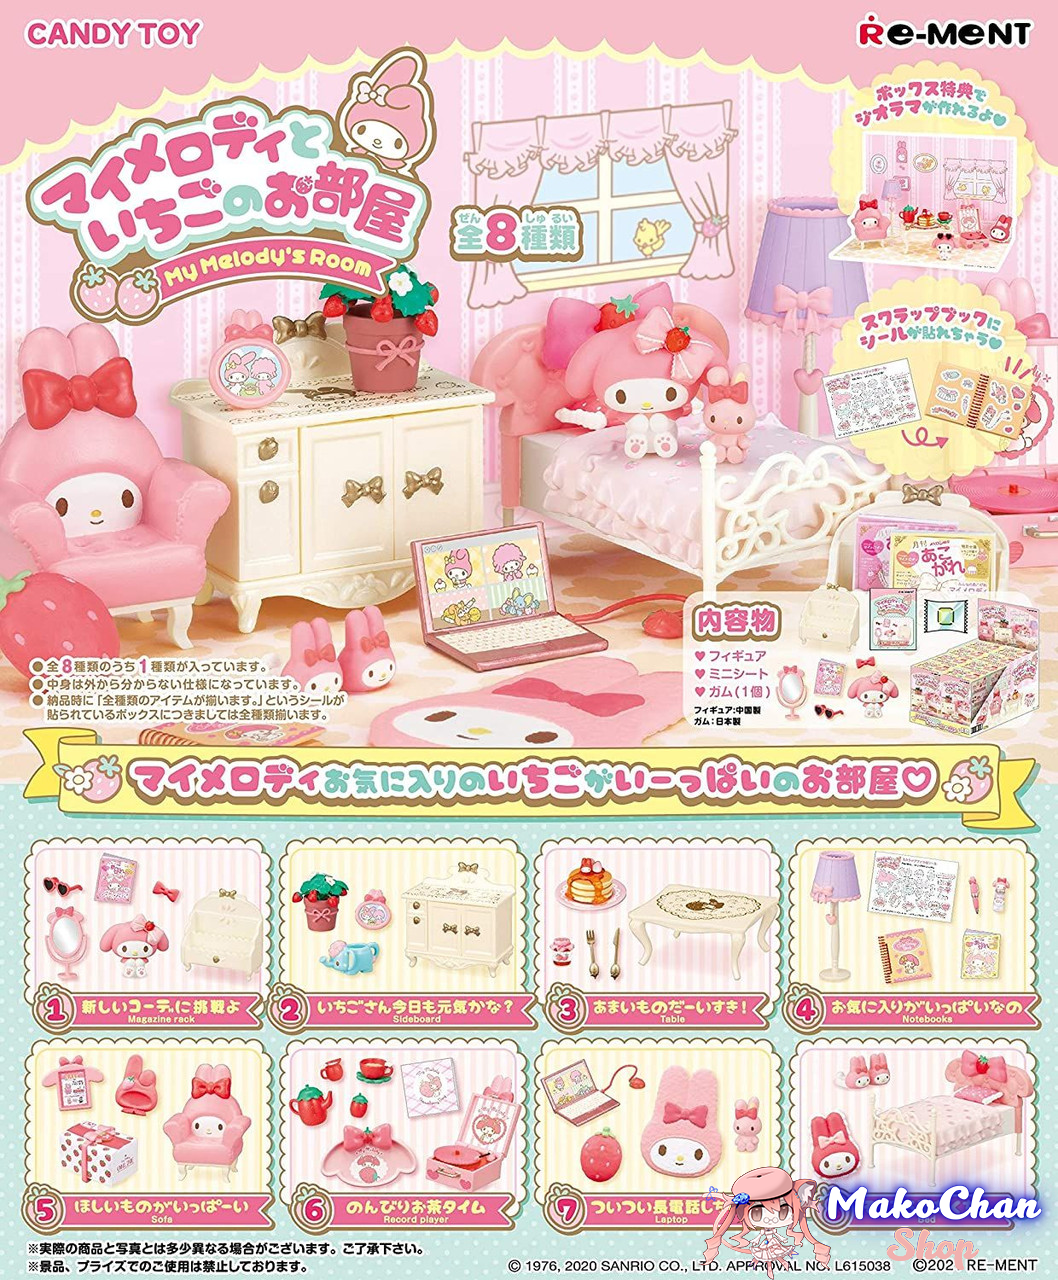 Re-ment: Sanrio: My Melody's Strawberry Room